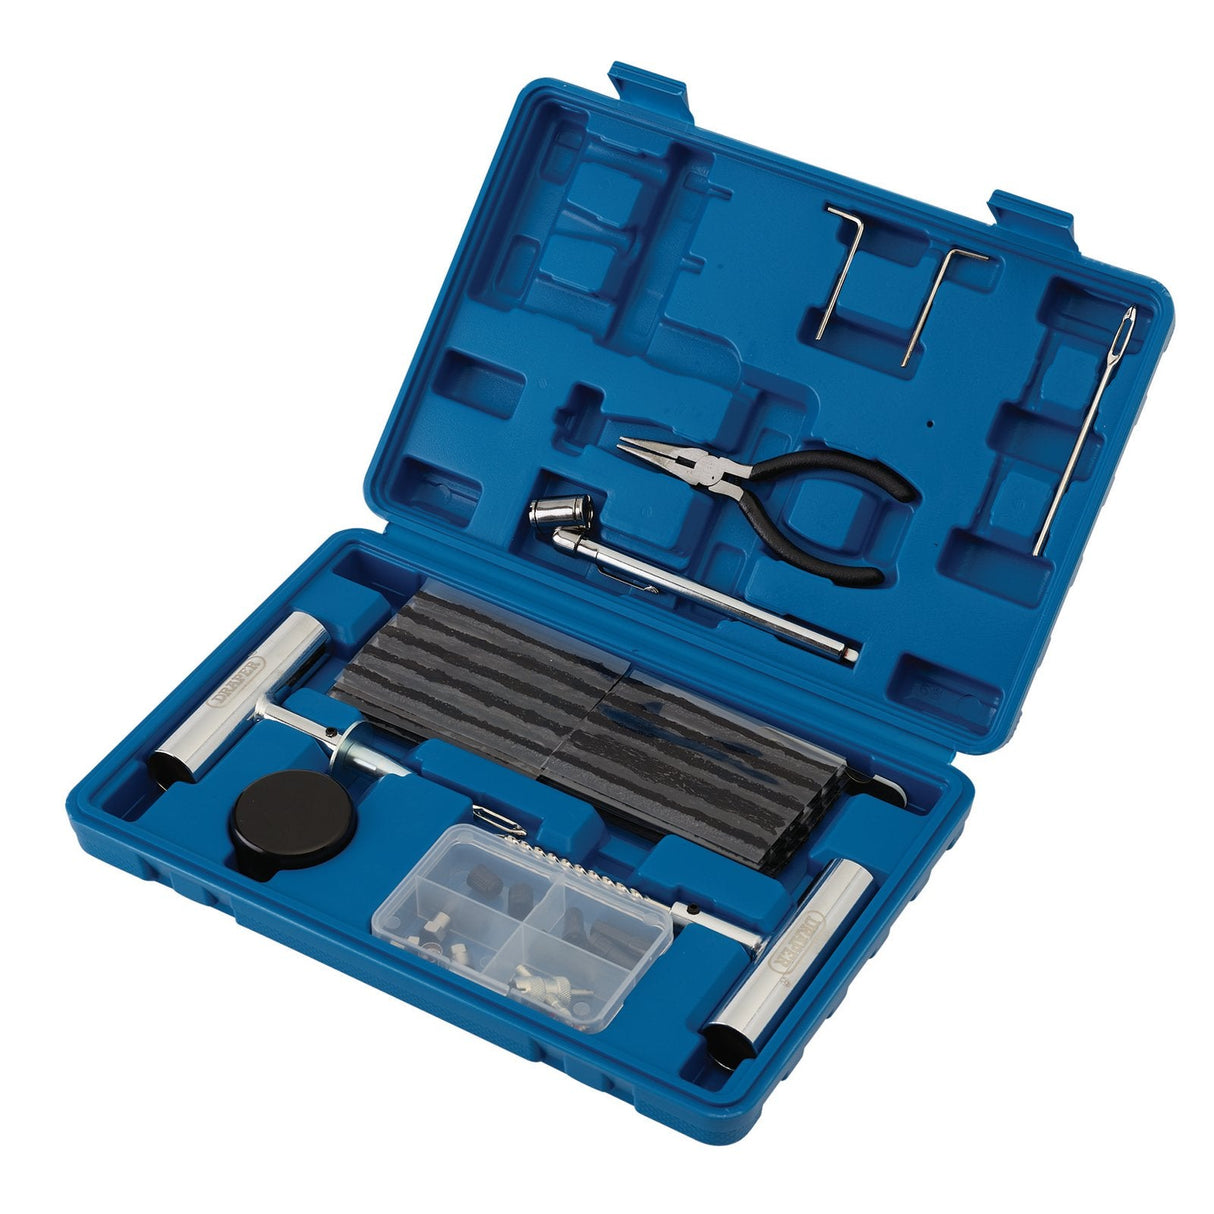 Draper Tyre Puncture Repair Kit For Tubeless Off Road Vehicles (65 Piece) - TPRK-65 - Farming Parts